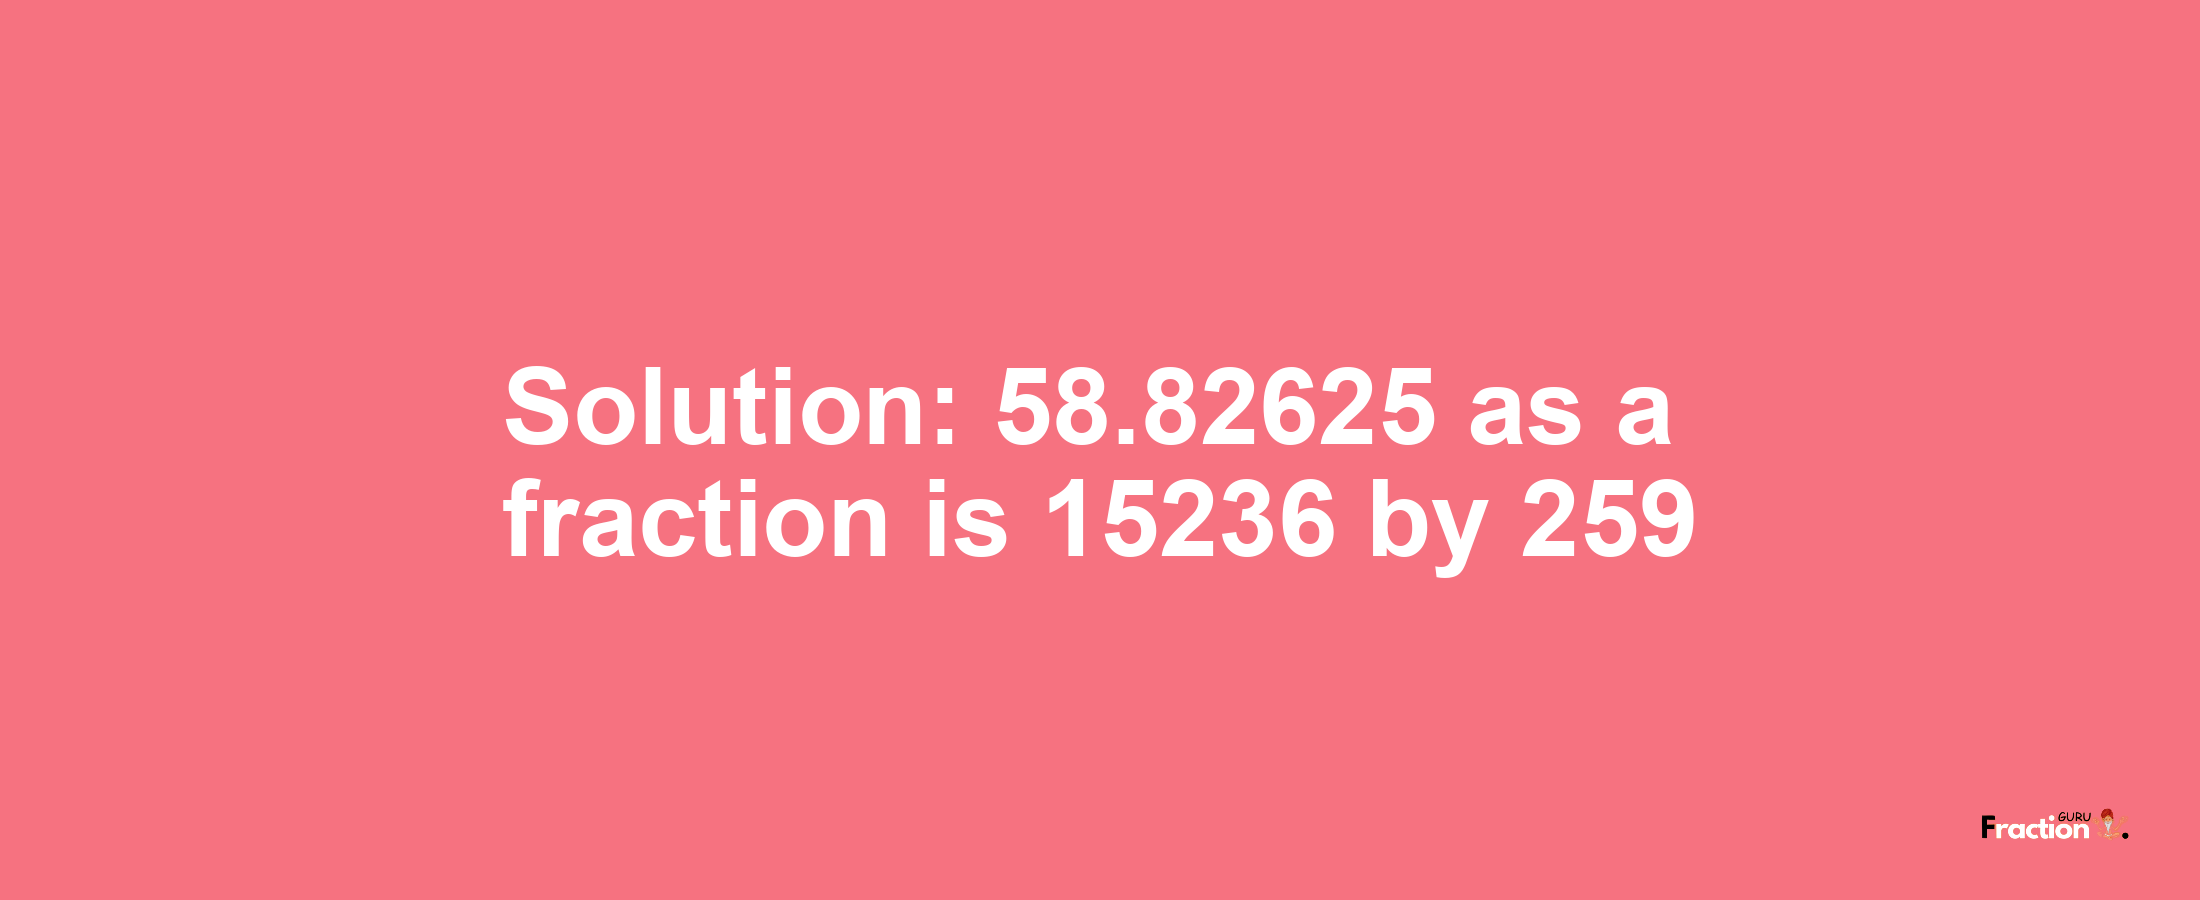 Solution:58.82625 as a fraction is 15236/259